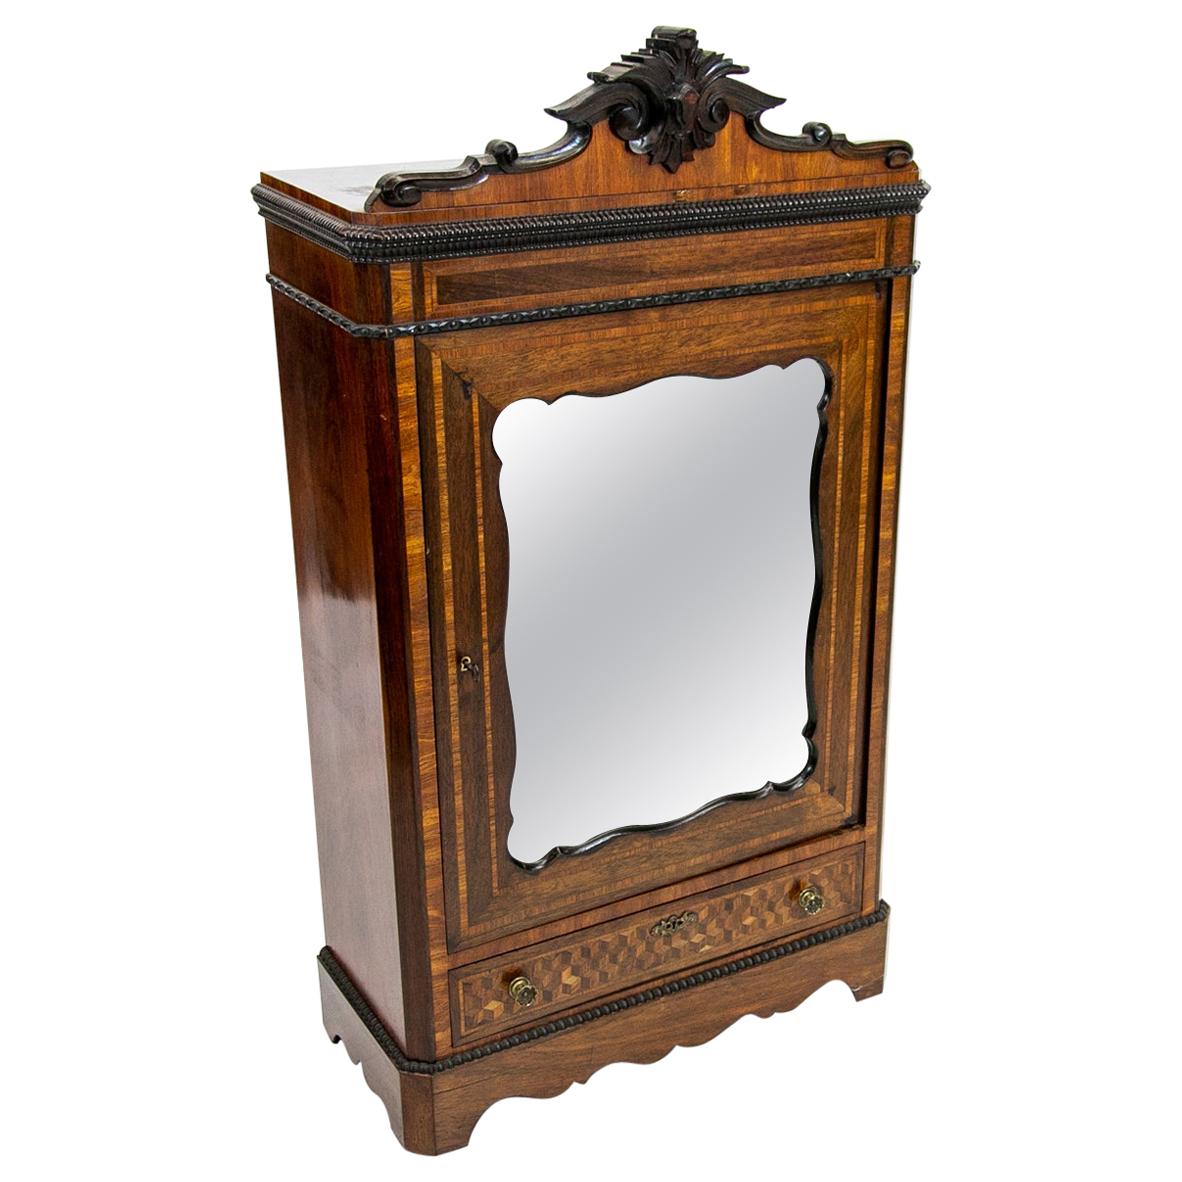 19th Century English Inlaid Miniature Armoire Cabinet